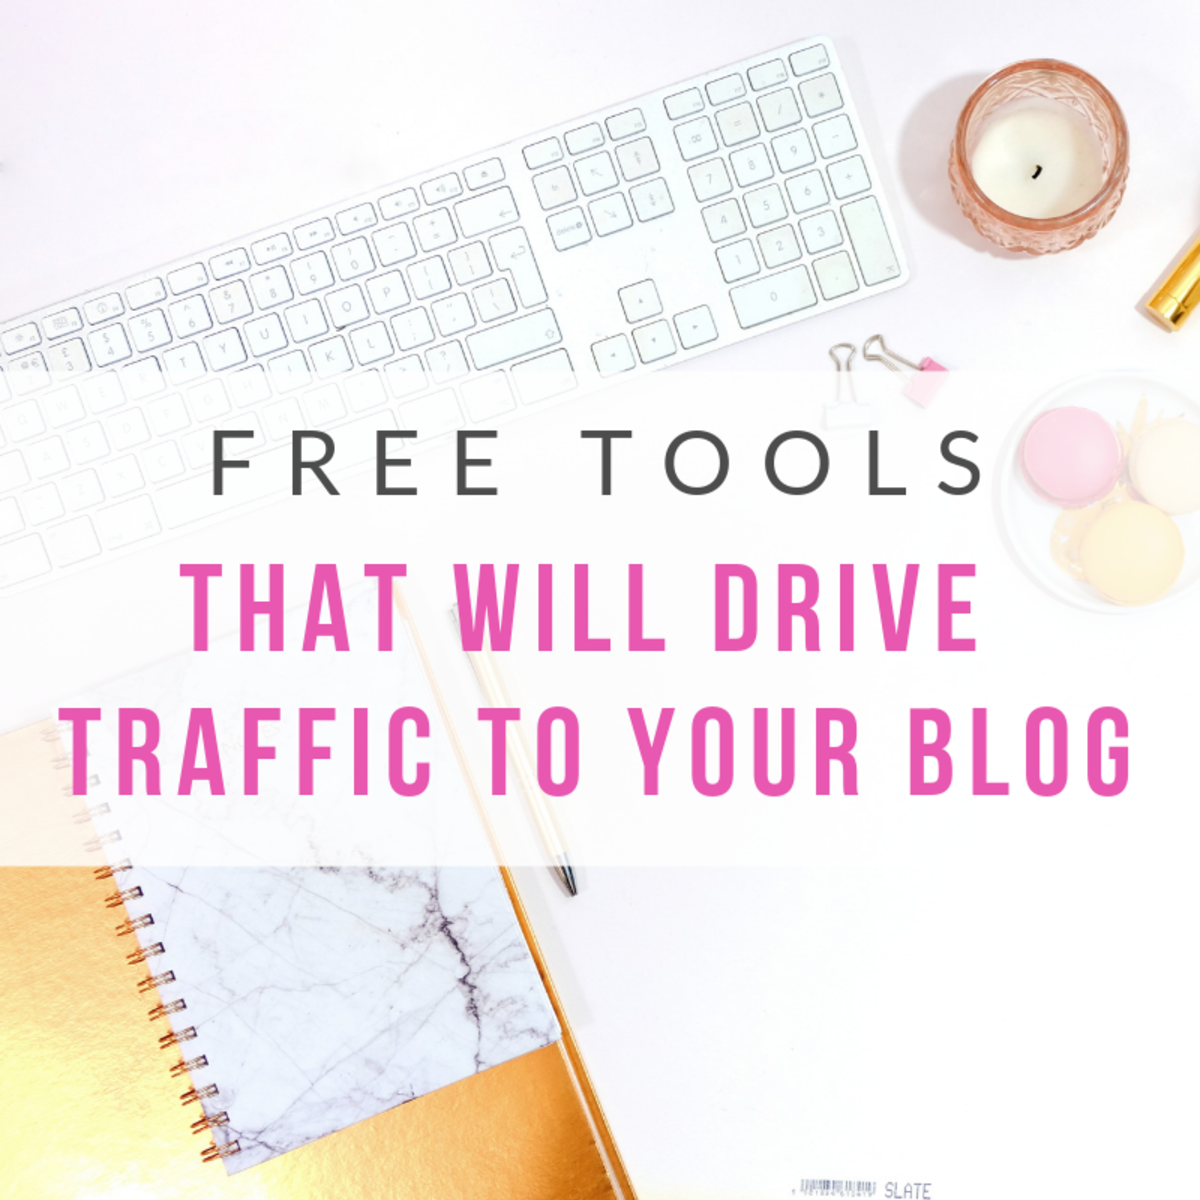 Free Tools That Will Drive Traffic to Your Blog